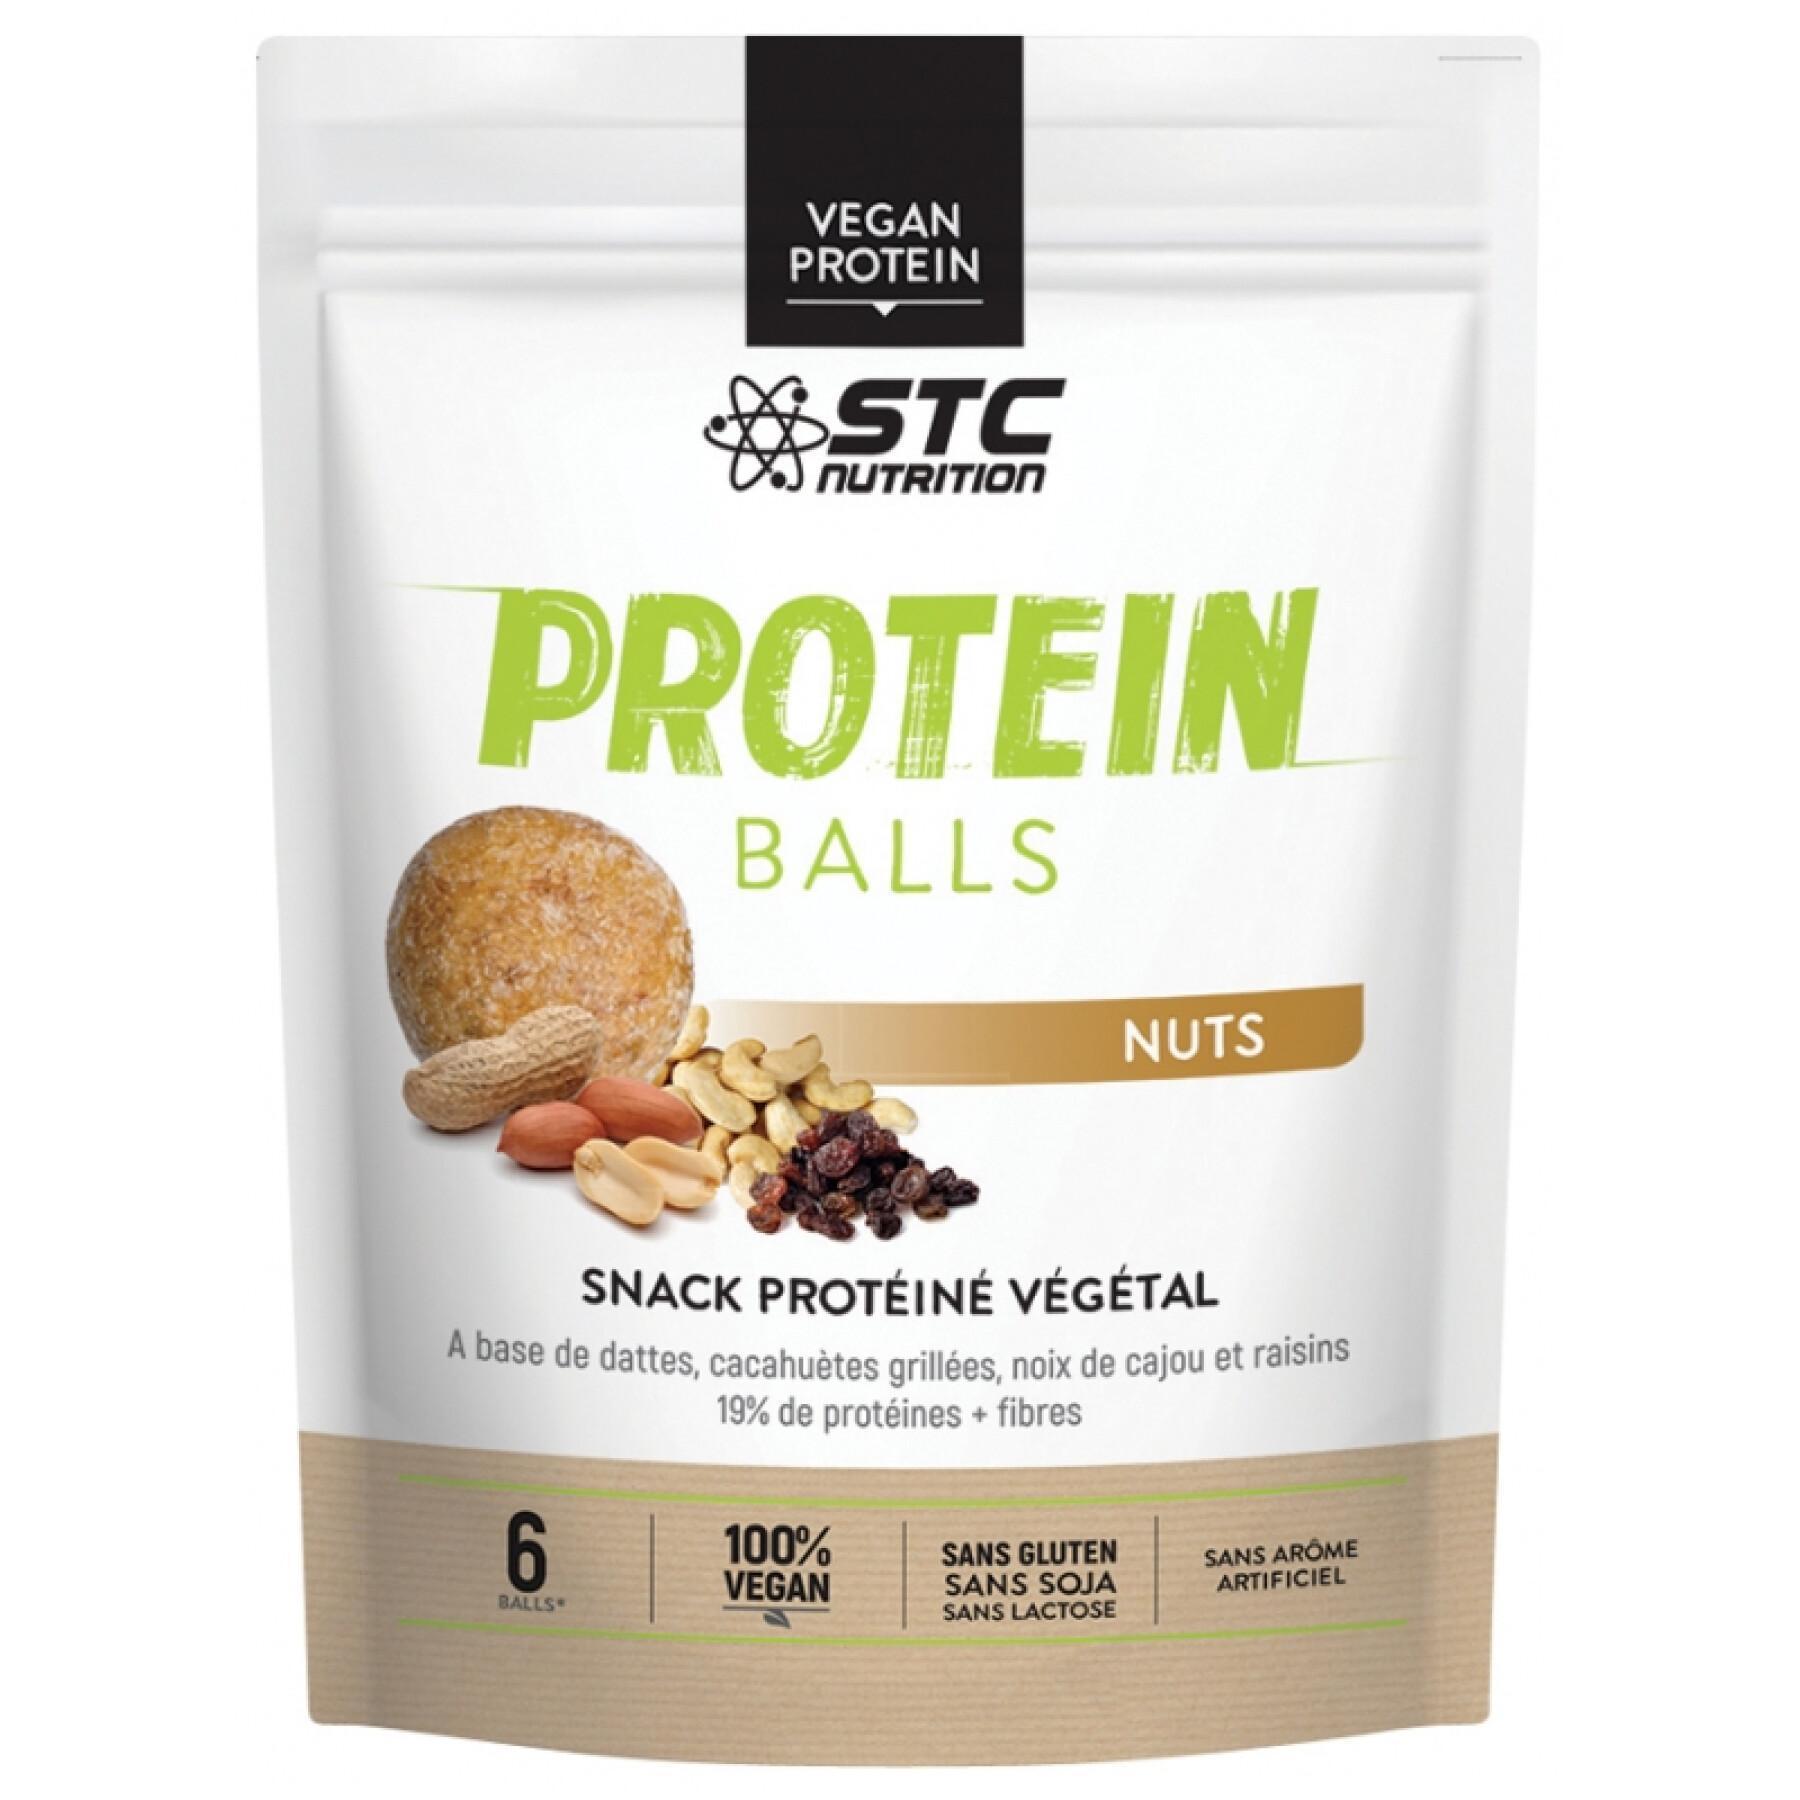 display of 8 bags of 6 protein balls STC Nutrition nuts